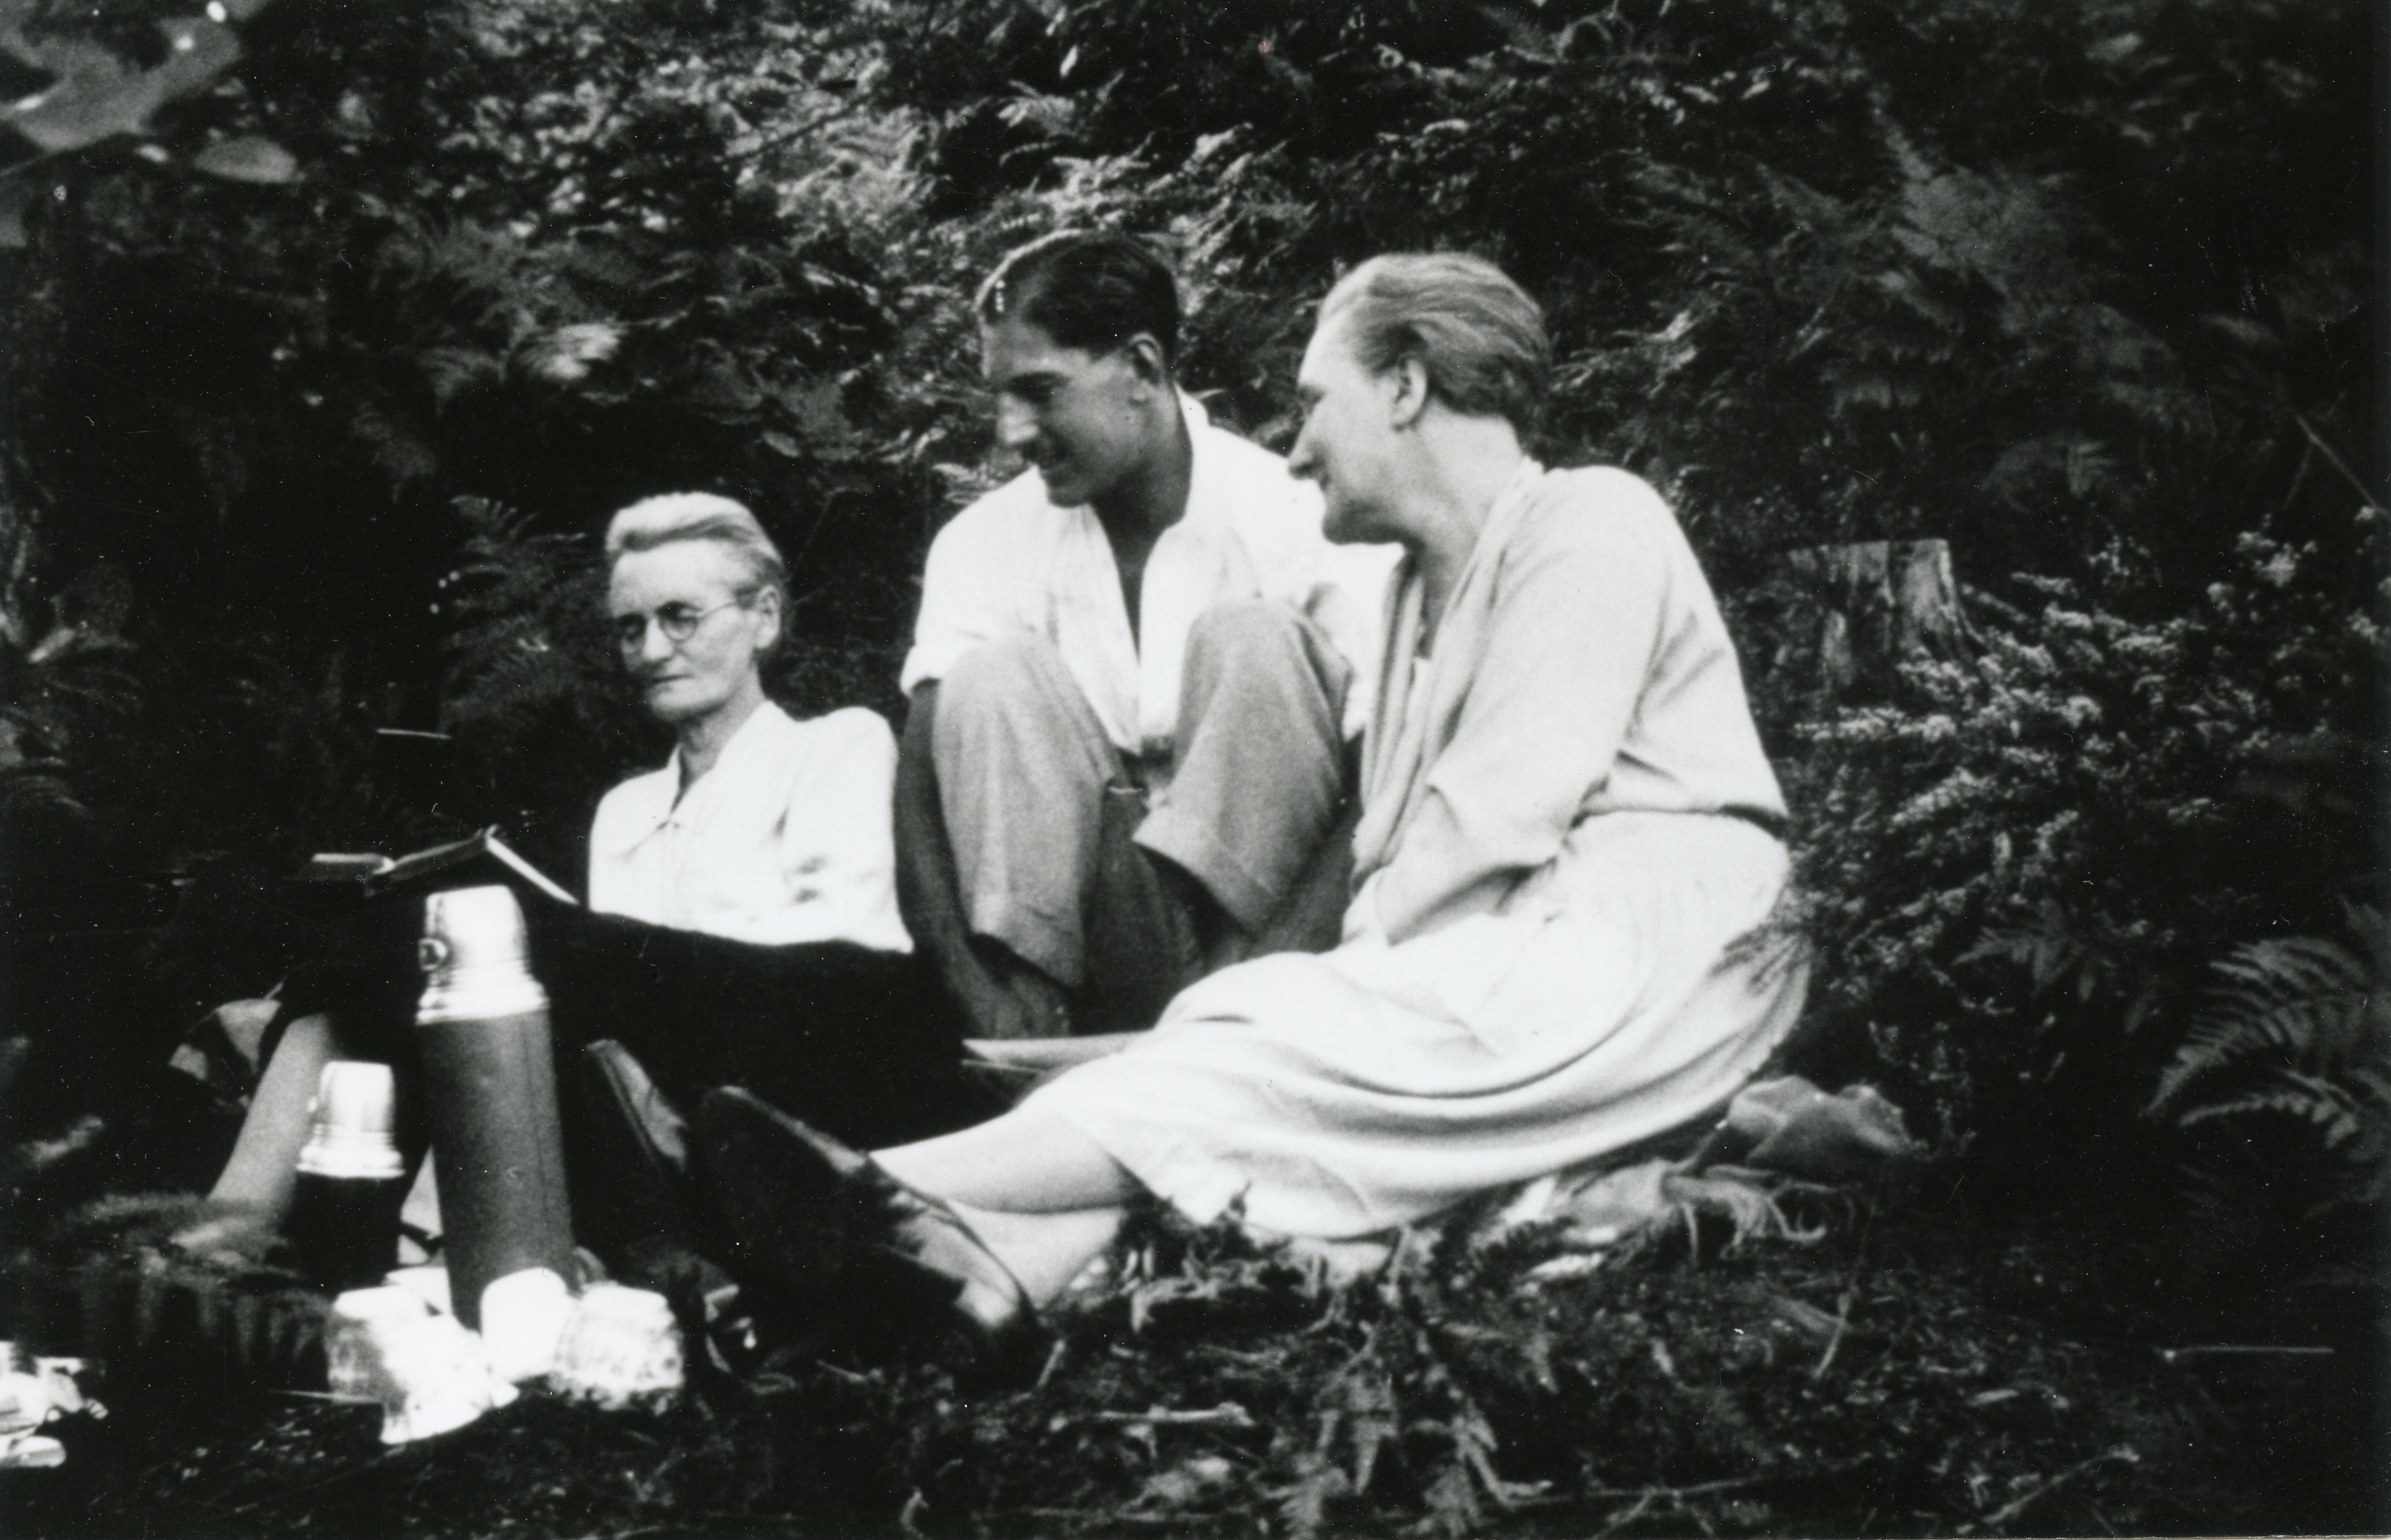 Mary reading to Denis and Mabel, Richmond Park, London, c 1930